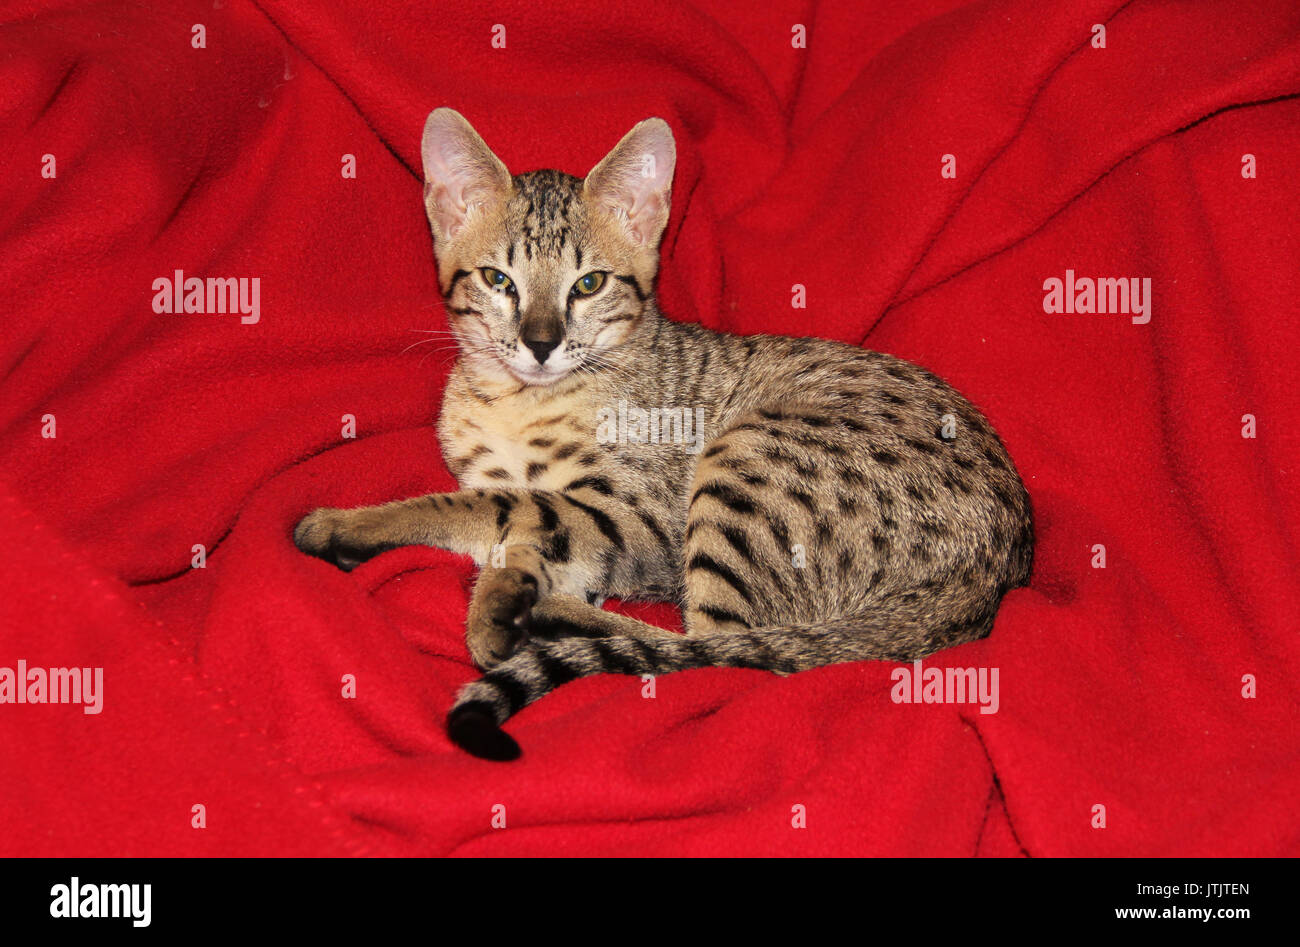 Savannah cat. Beautiful spotted and striped gold colored Serval Savannah kitten with golden yellow eyes and a black nose relaxing on a red blanket. Stock Photo